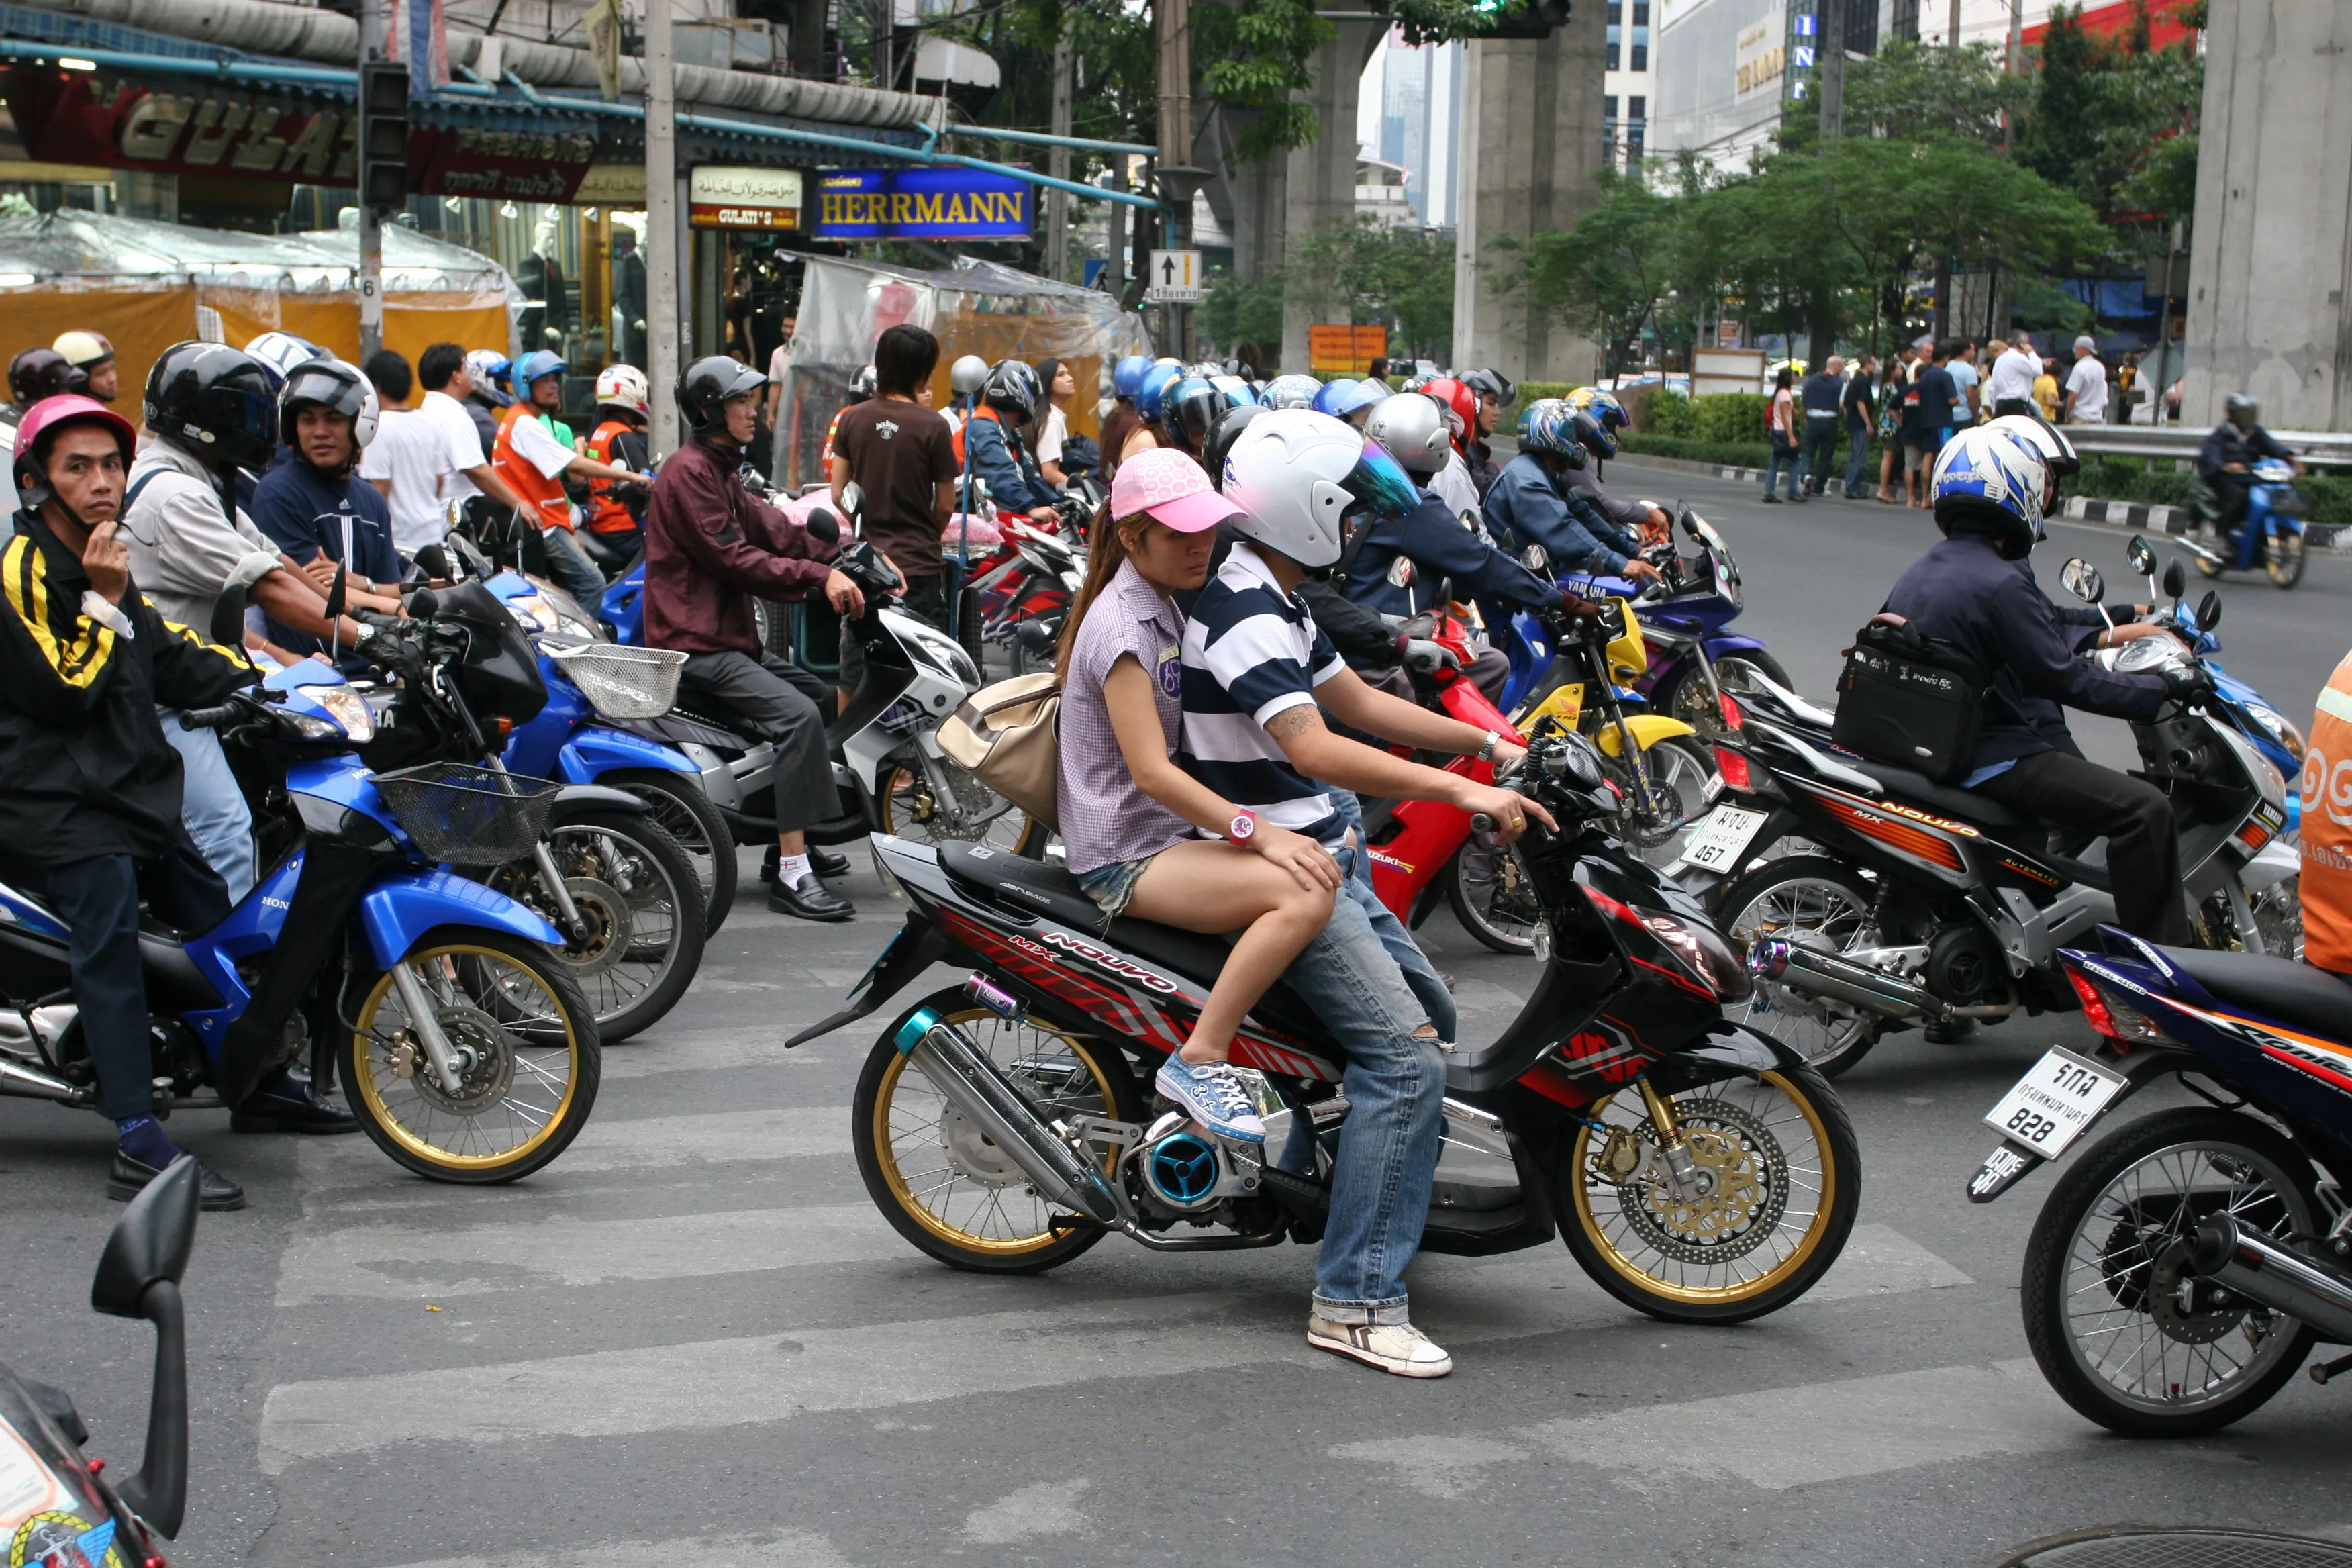 Motorbike Rental in Thailand, Central Asia | Motorcycles - Rated 4.2